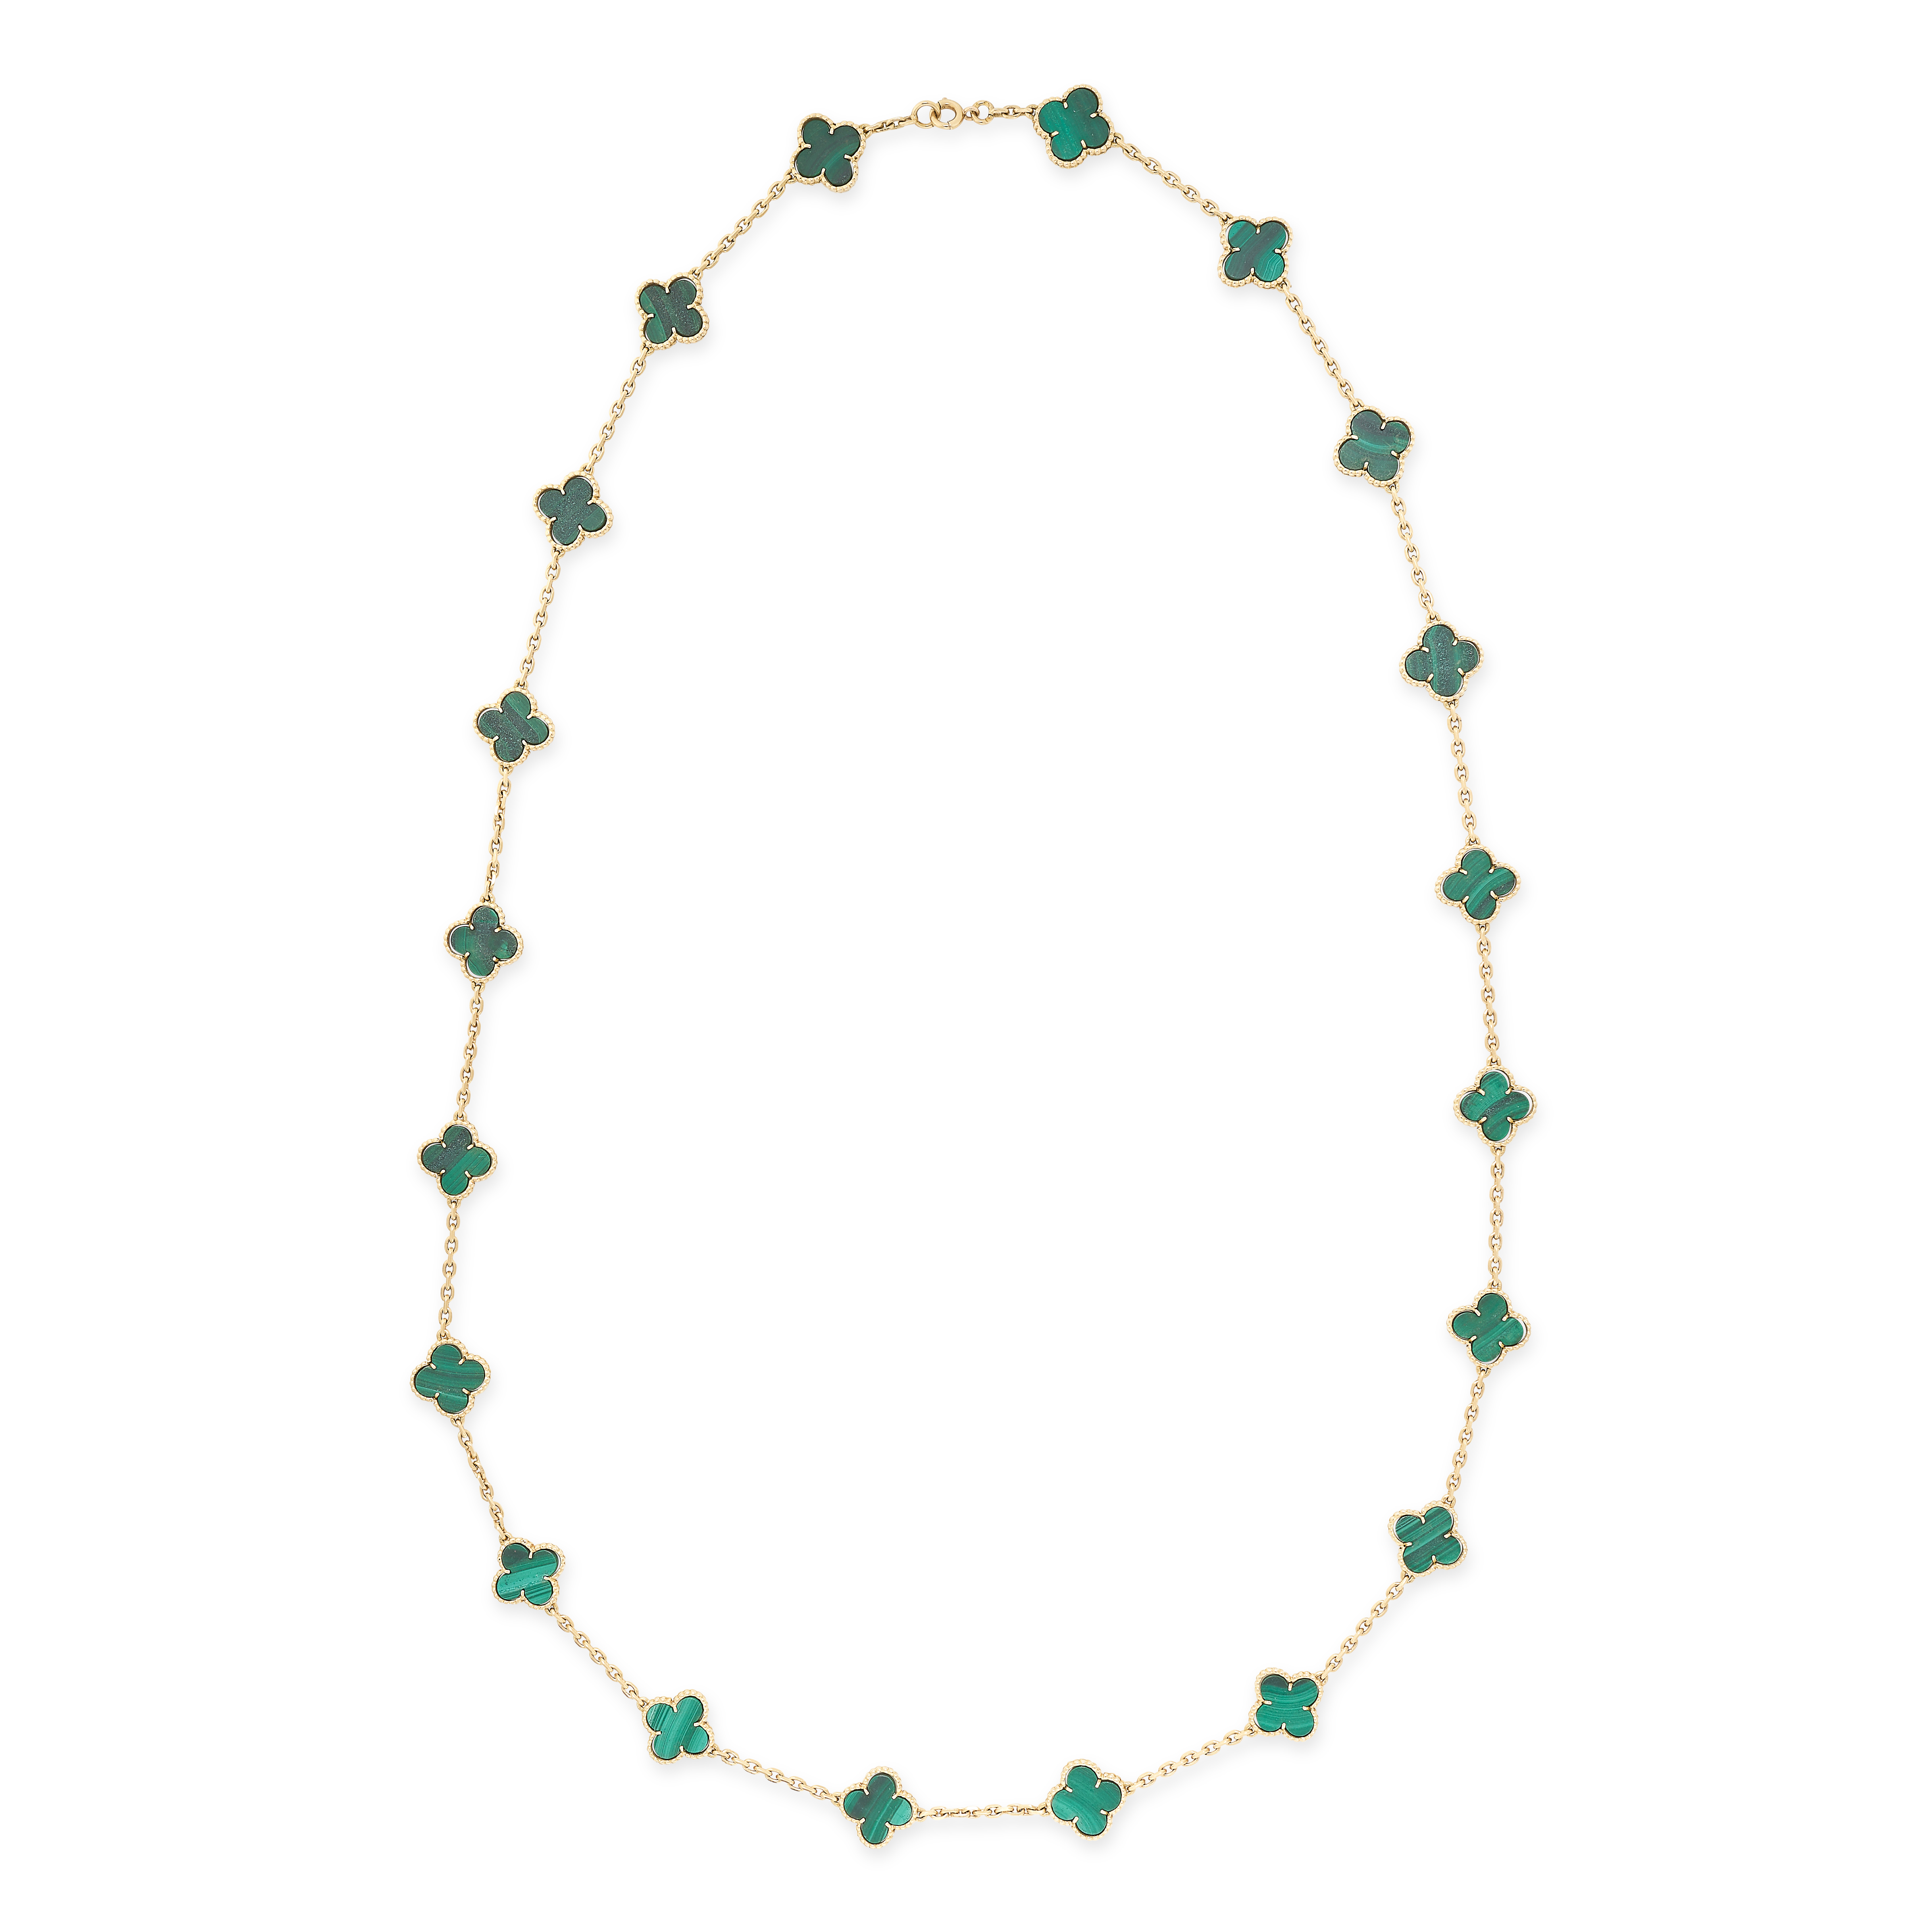 VAN CLEEF & ARPELS, A MALACHITE ALHAMBRA NECKLACE in 18ct yellow gold, the chain punctuated by